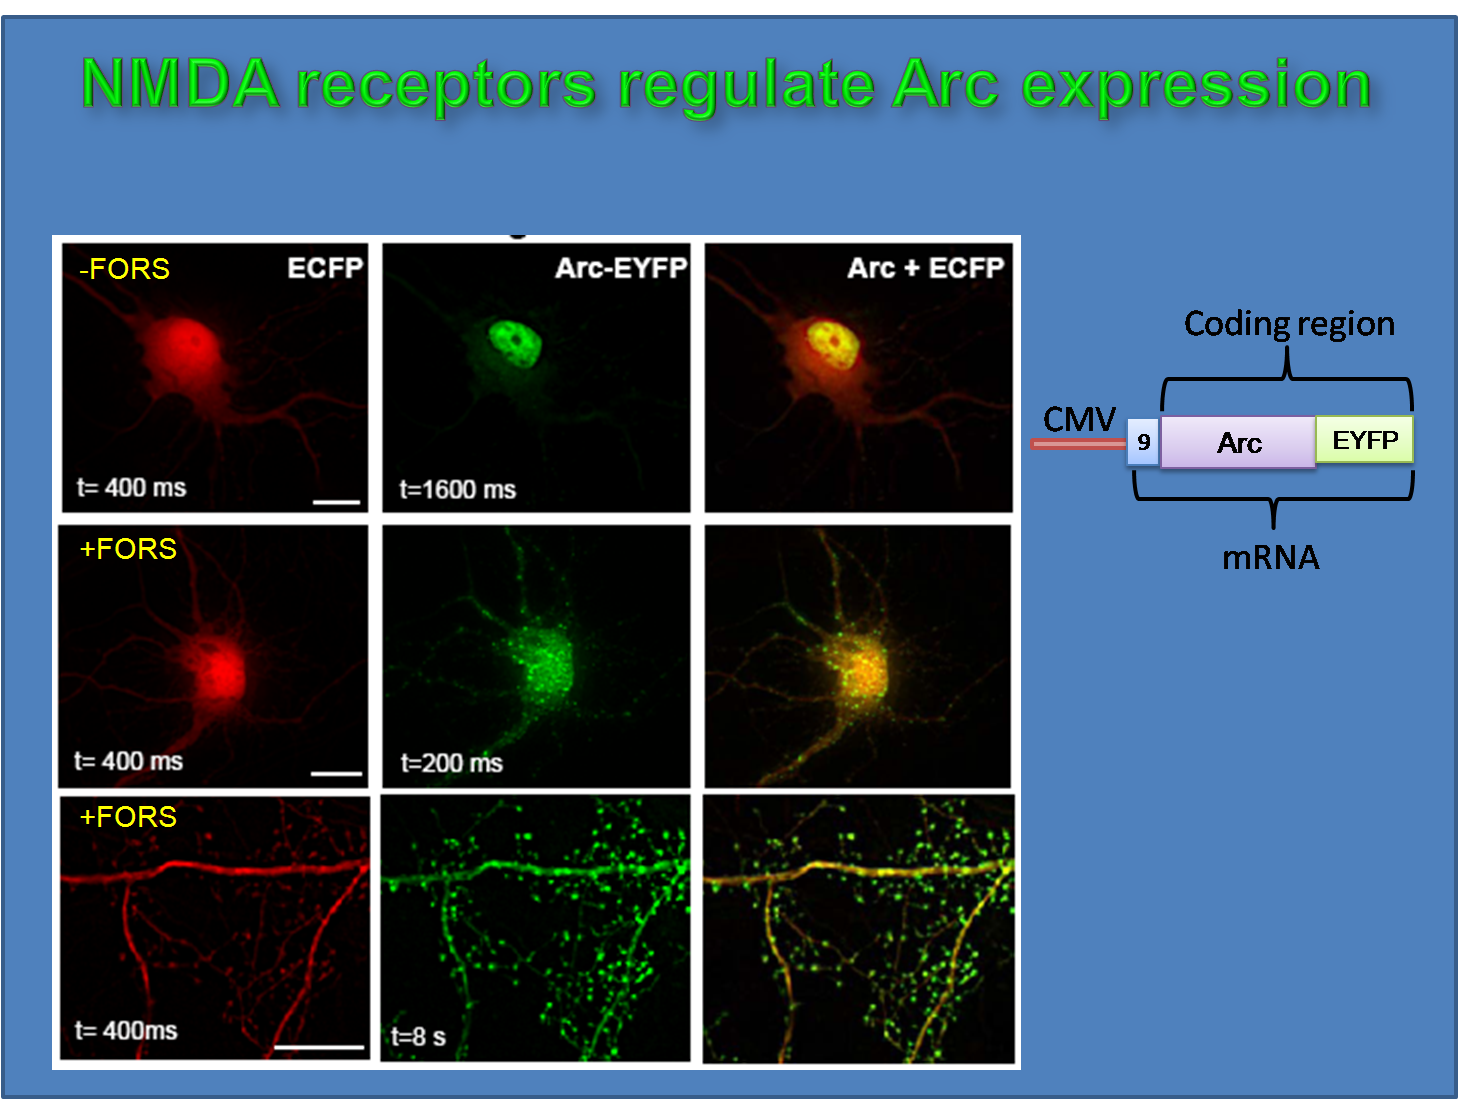 5'- and 3'UTR are not required for regulation of Arc expression